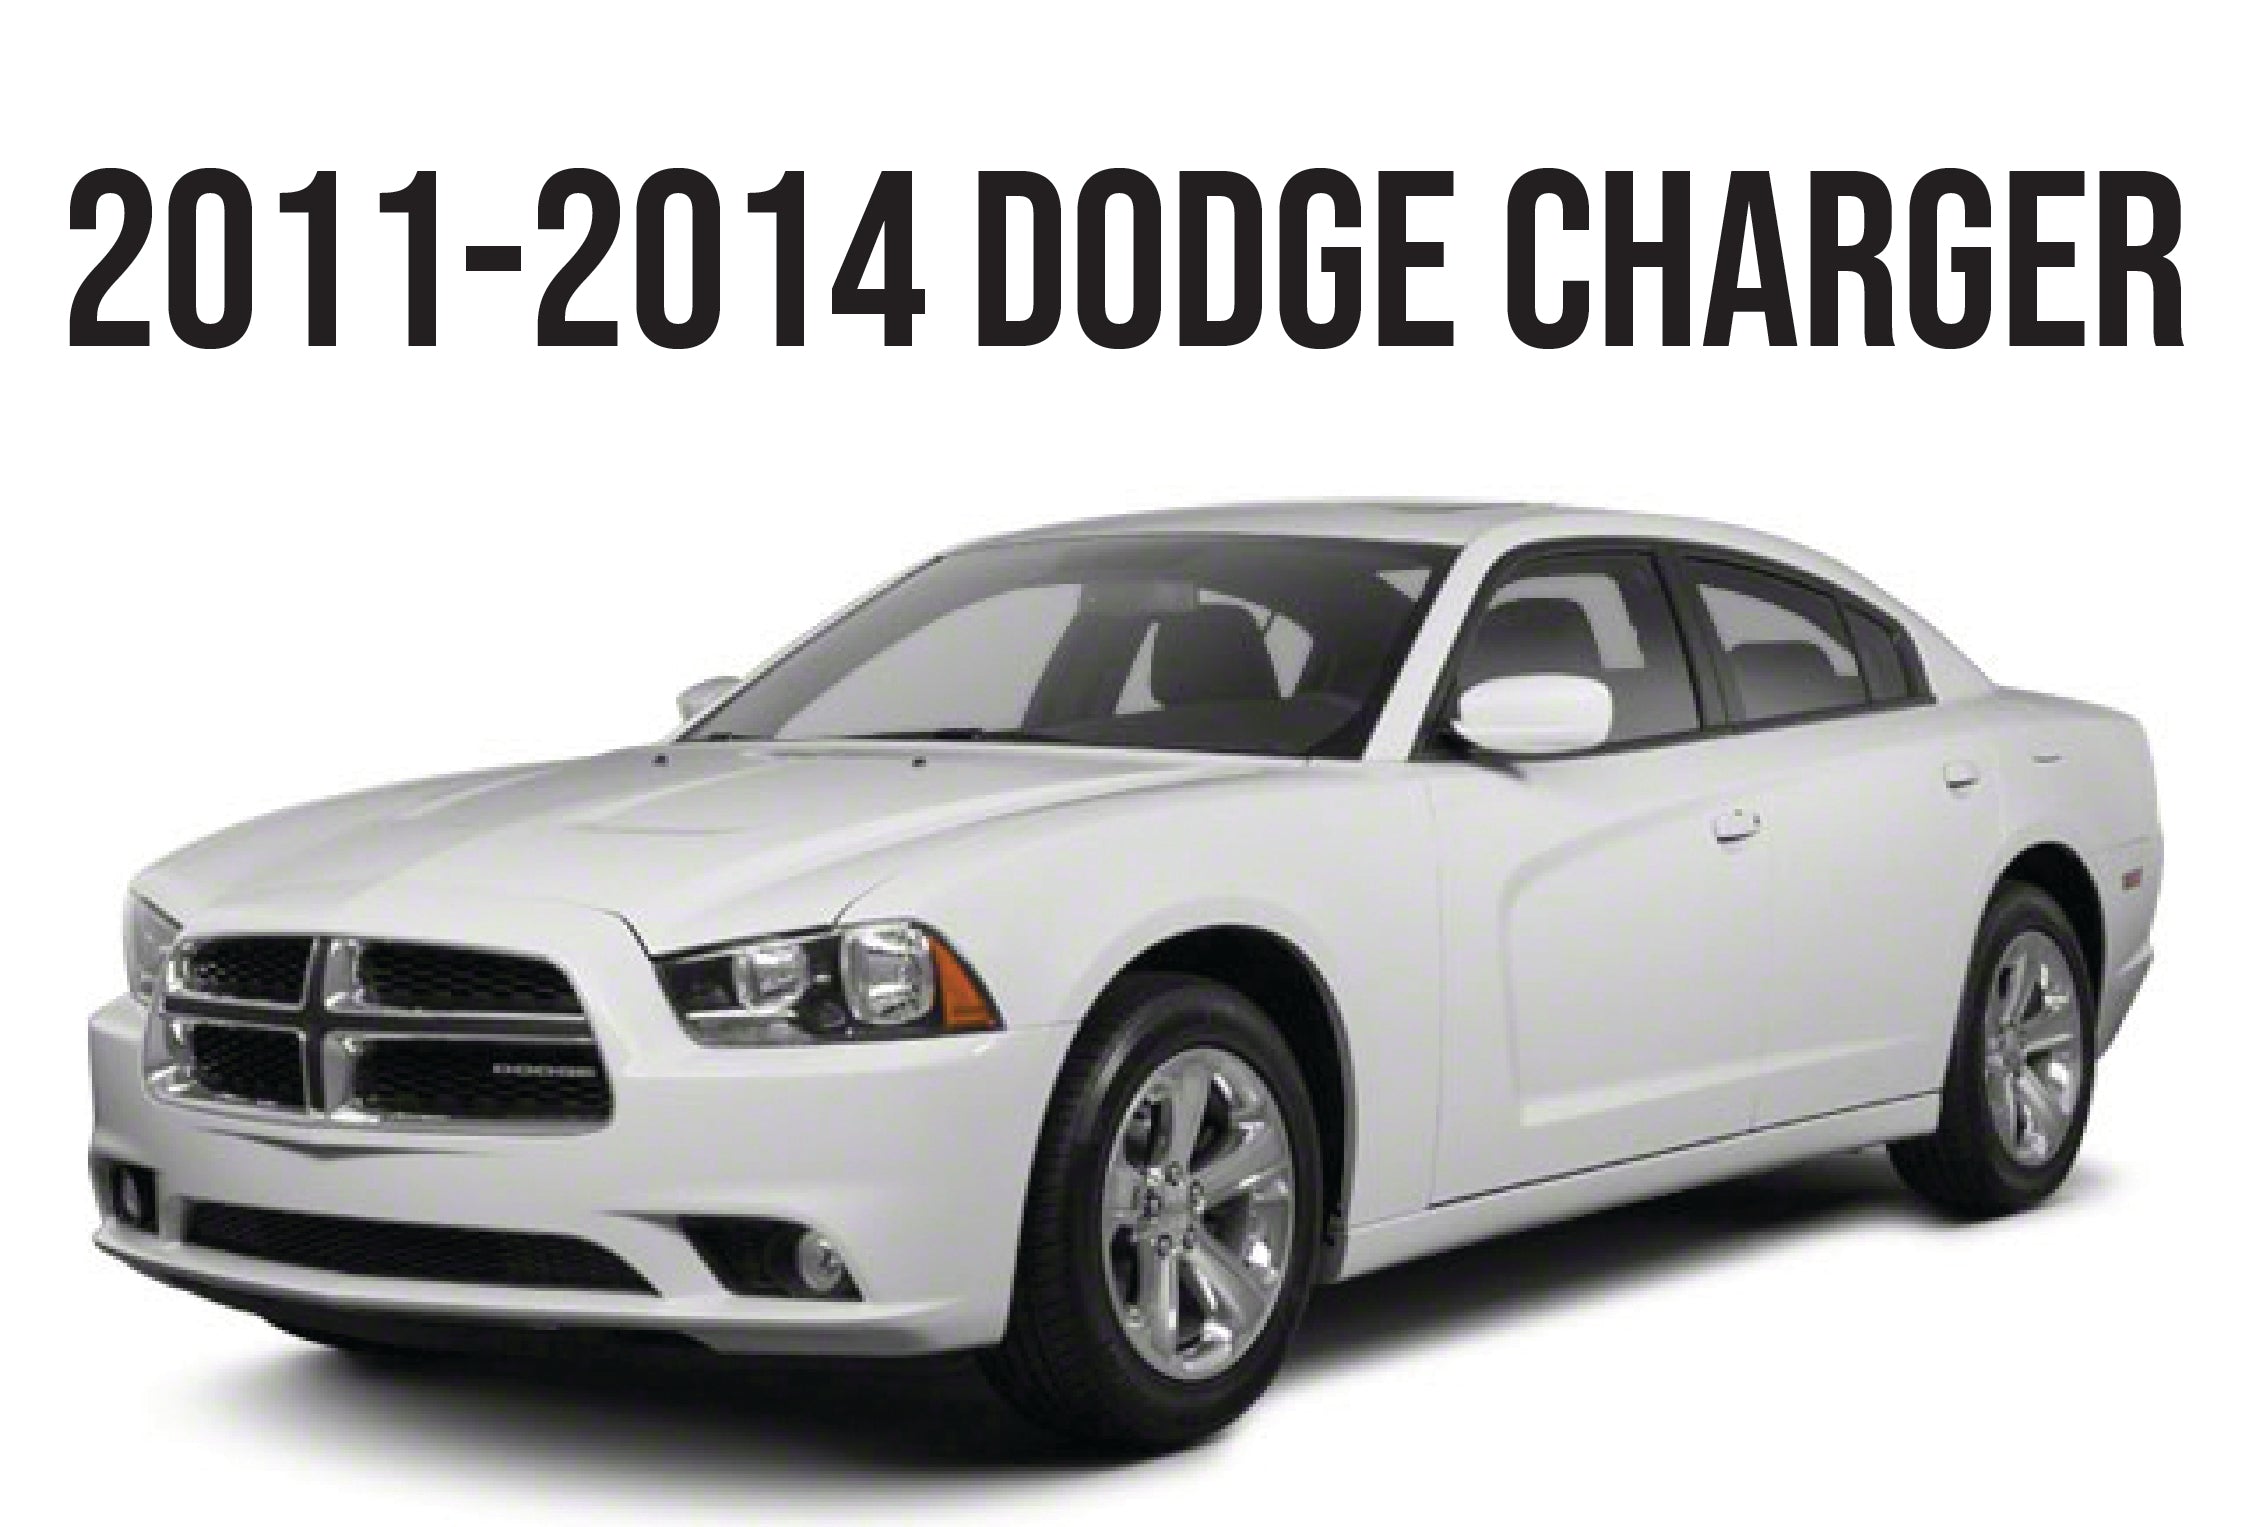 2011-2014 DODGE CHARGER